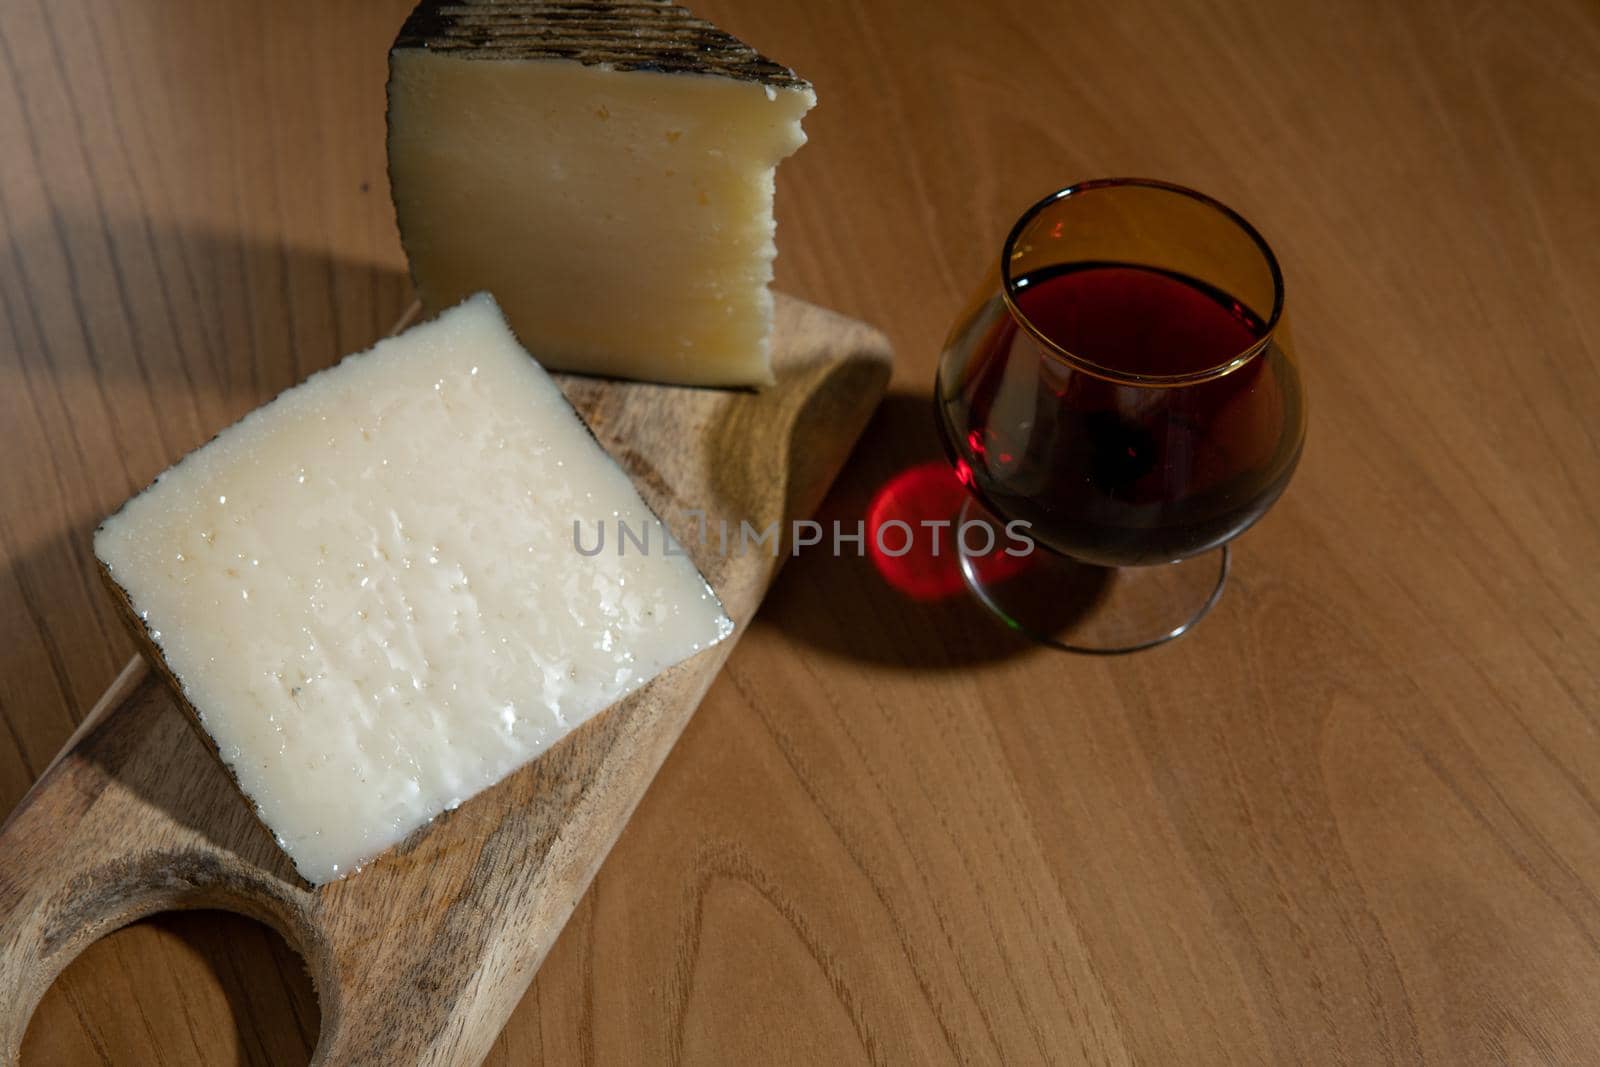 Cheese wedges on wooden board and red wine